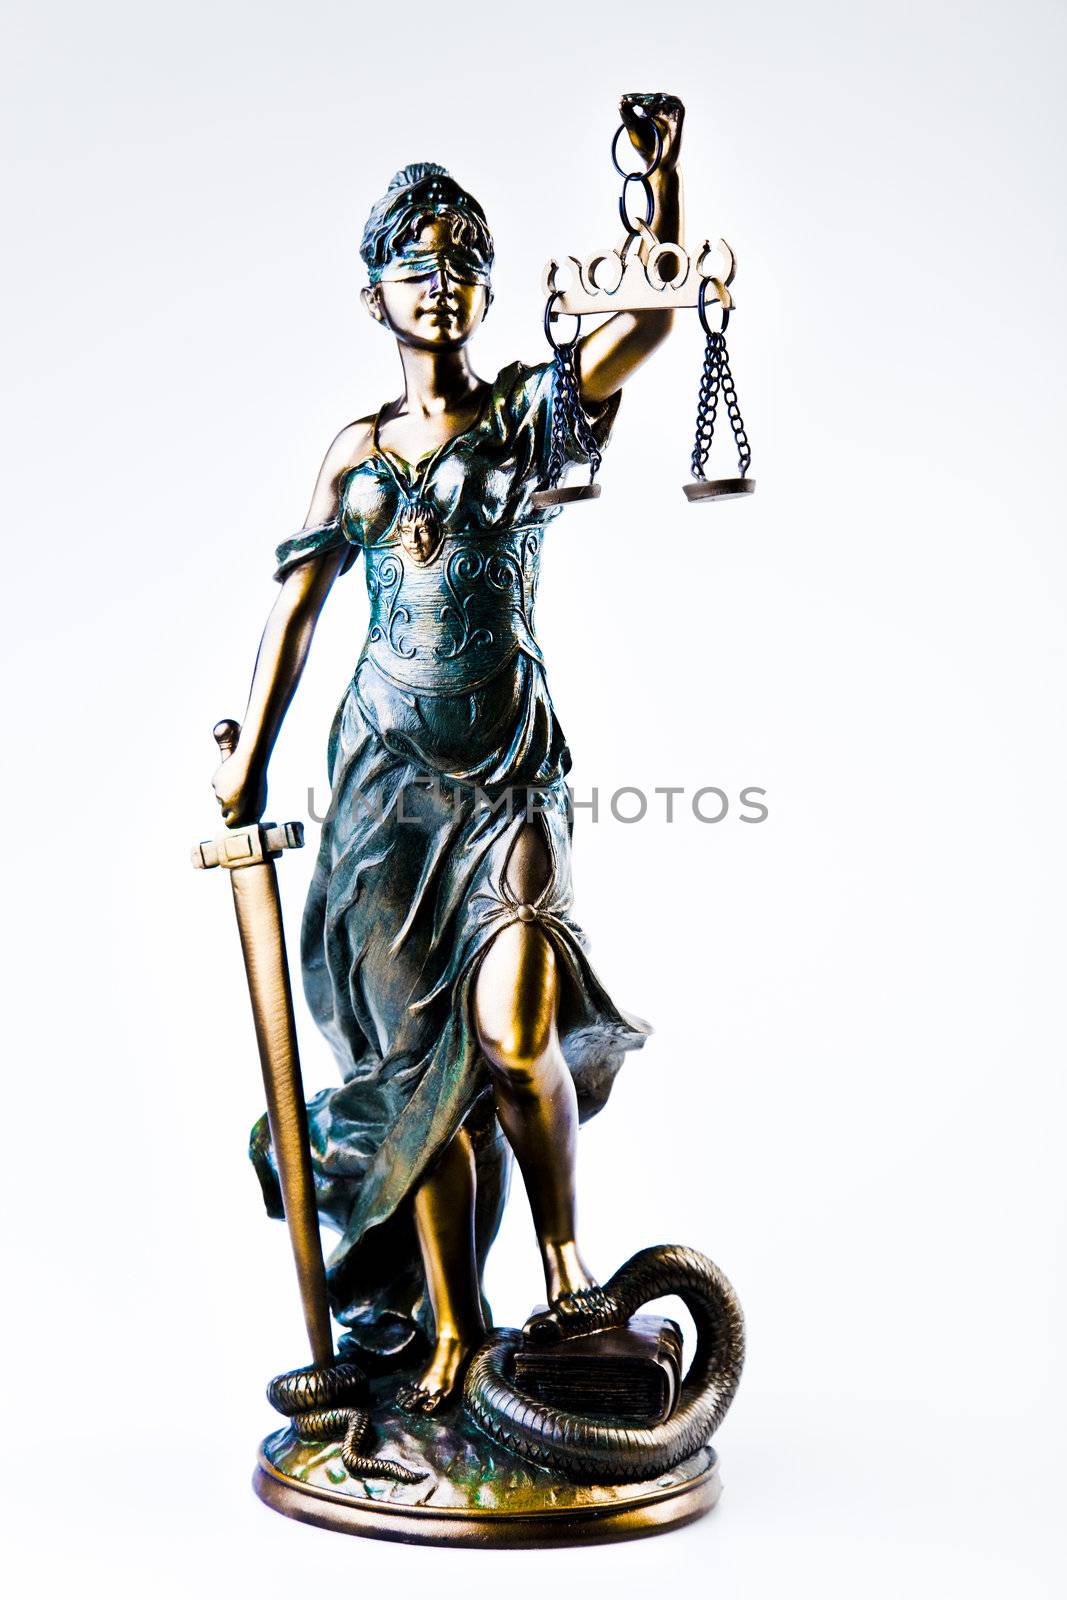 Scales of Justice by JanPietruszka